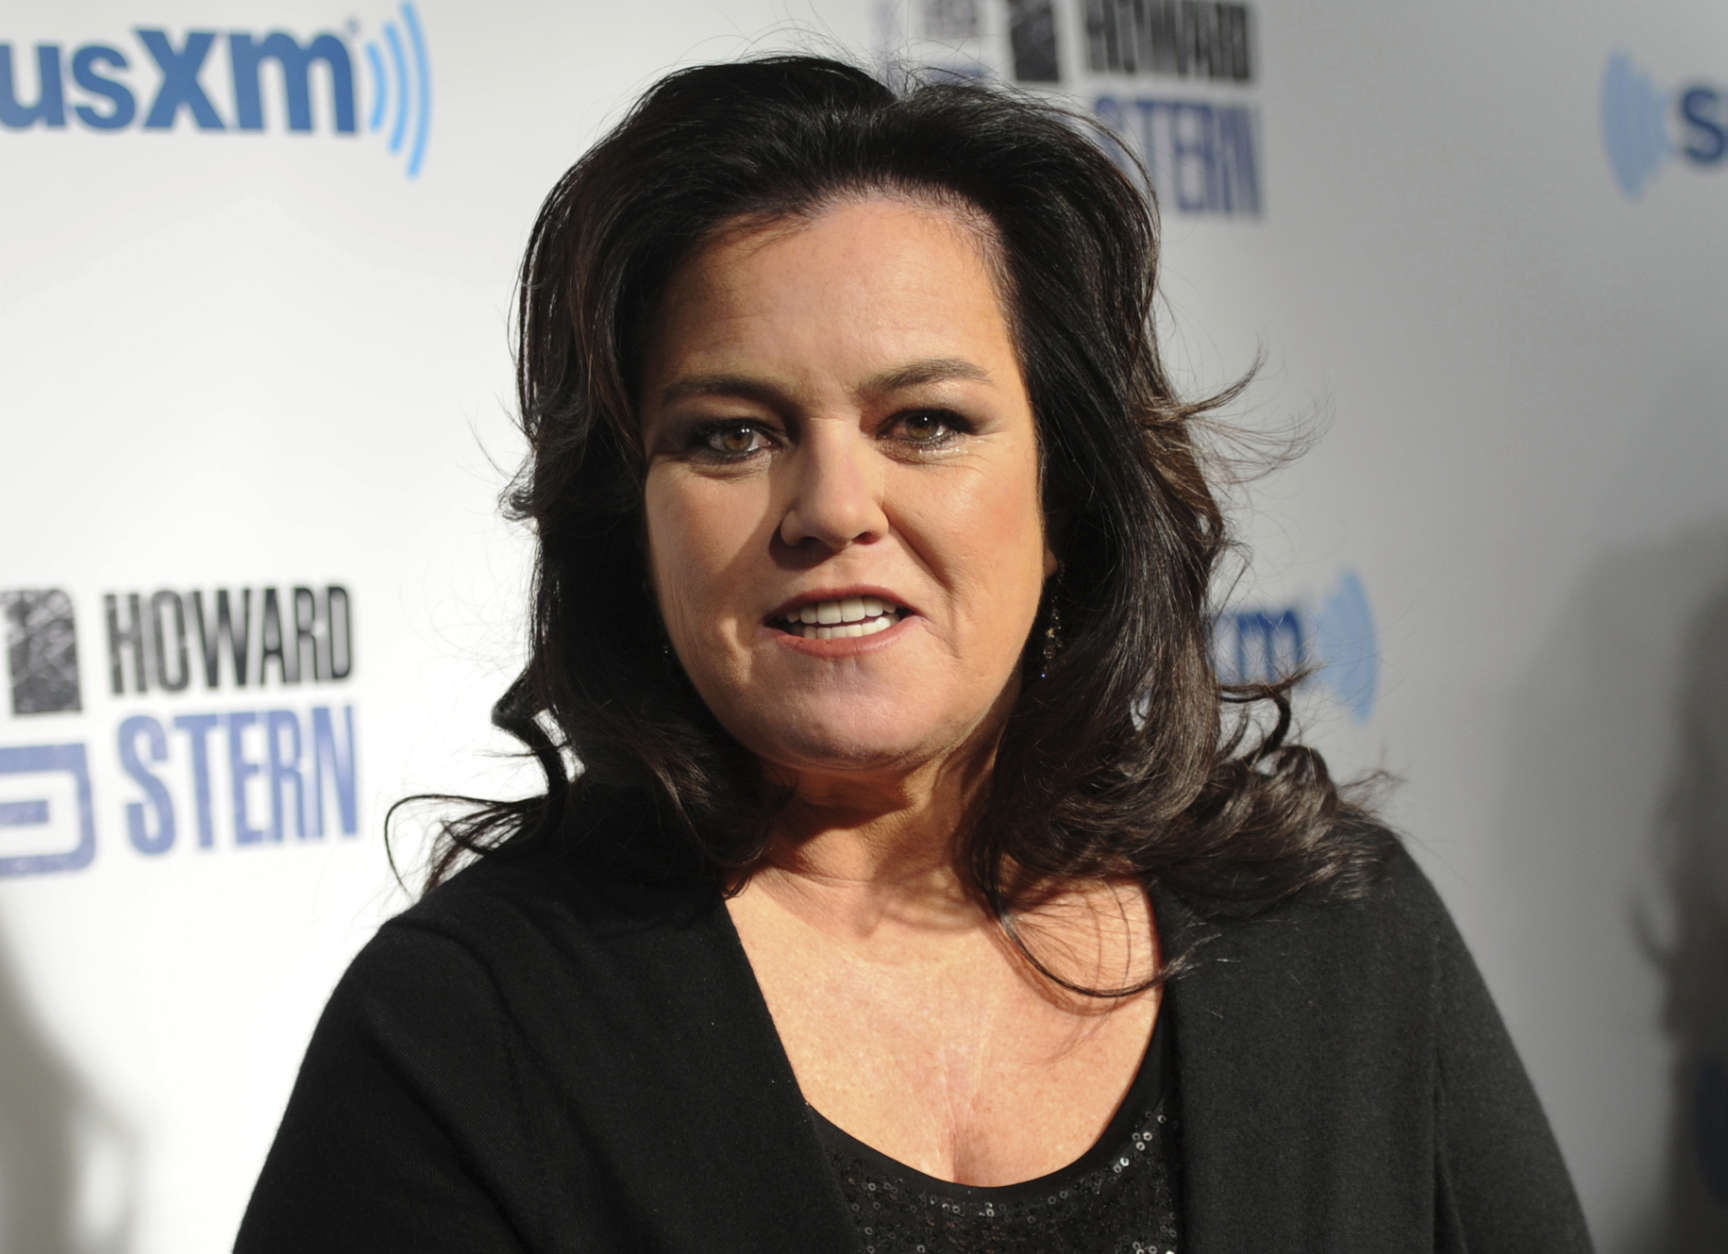 Actress and comedian Rosie O'Donnell is 55 on March 21. (Photo by Evan Agostini/Invision/AP, File)